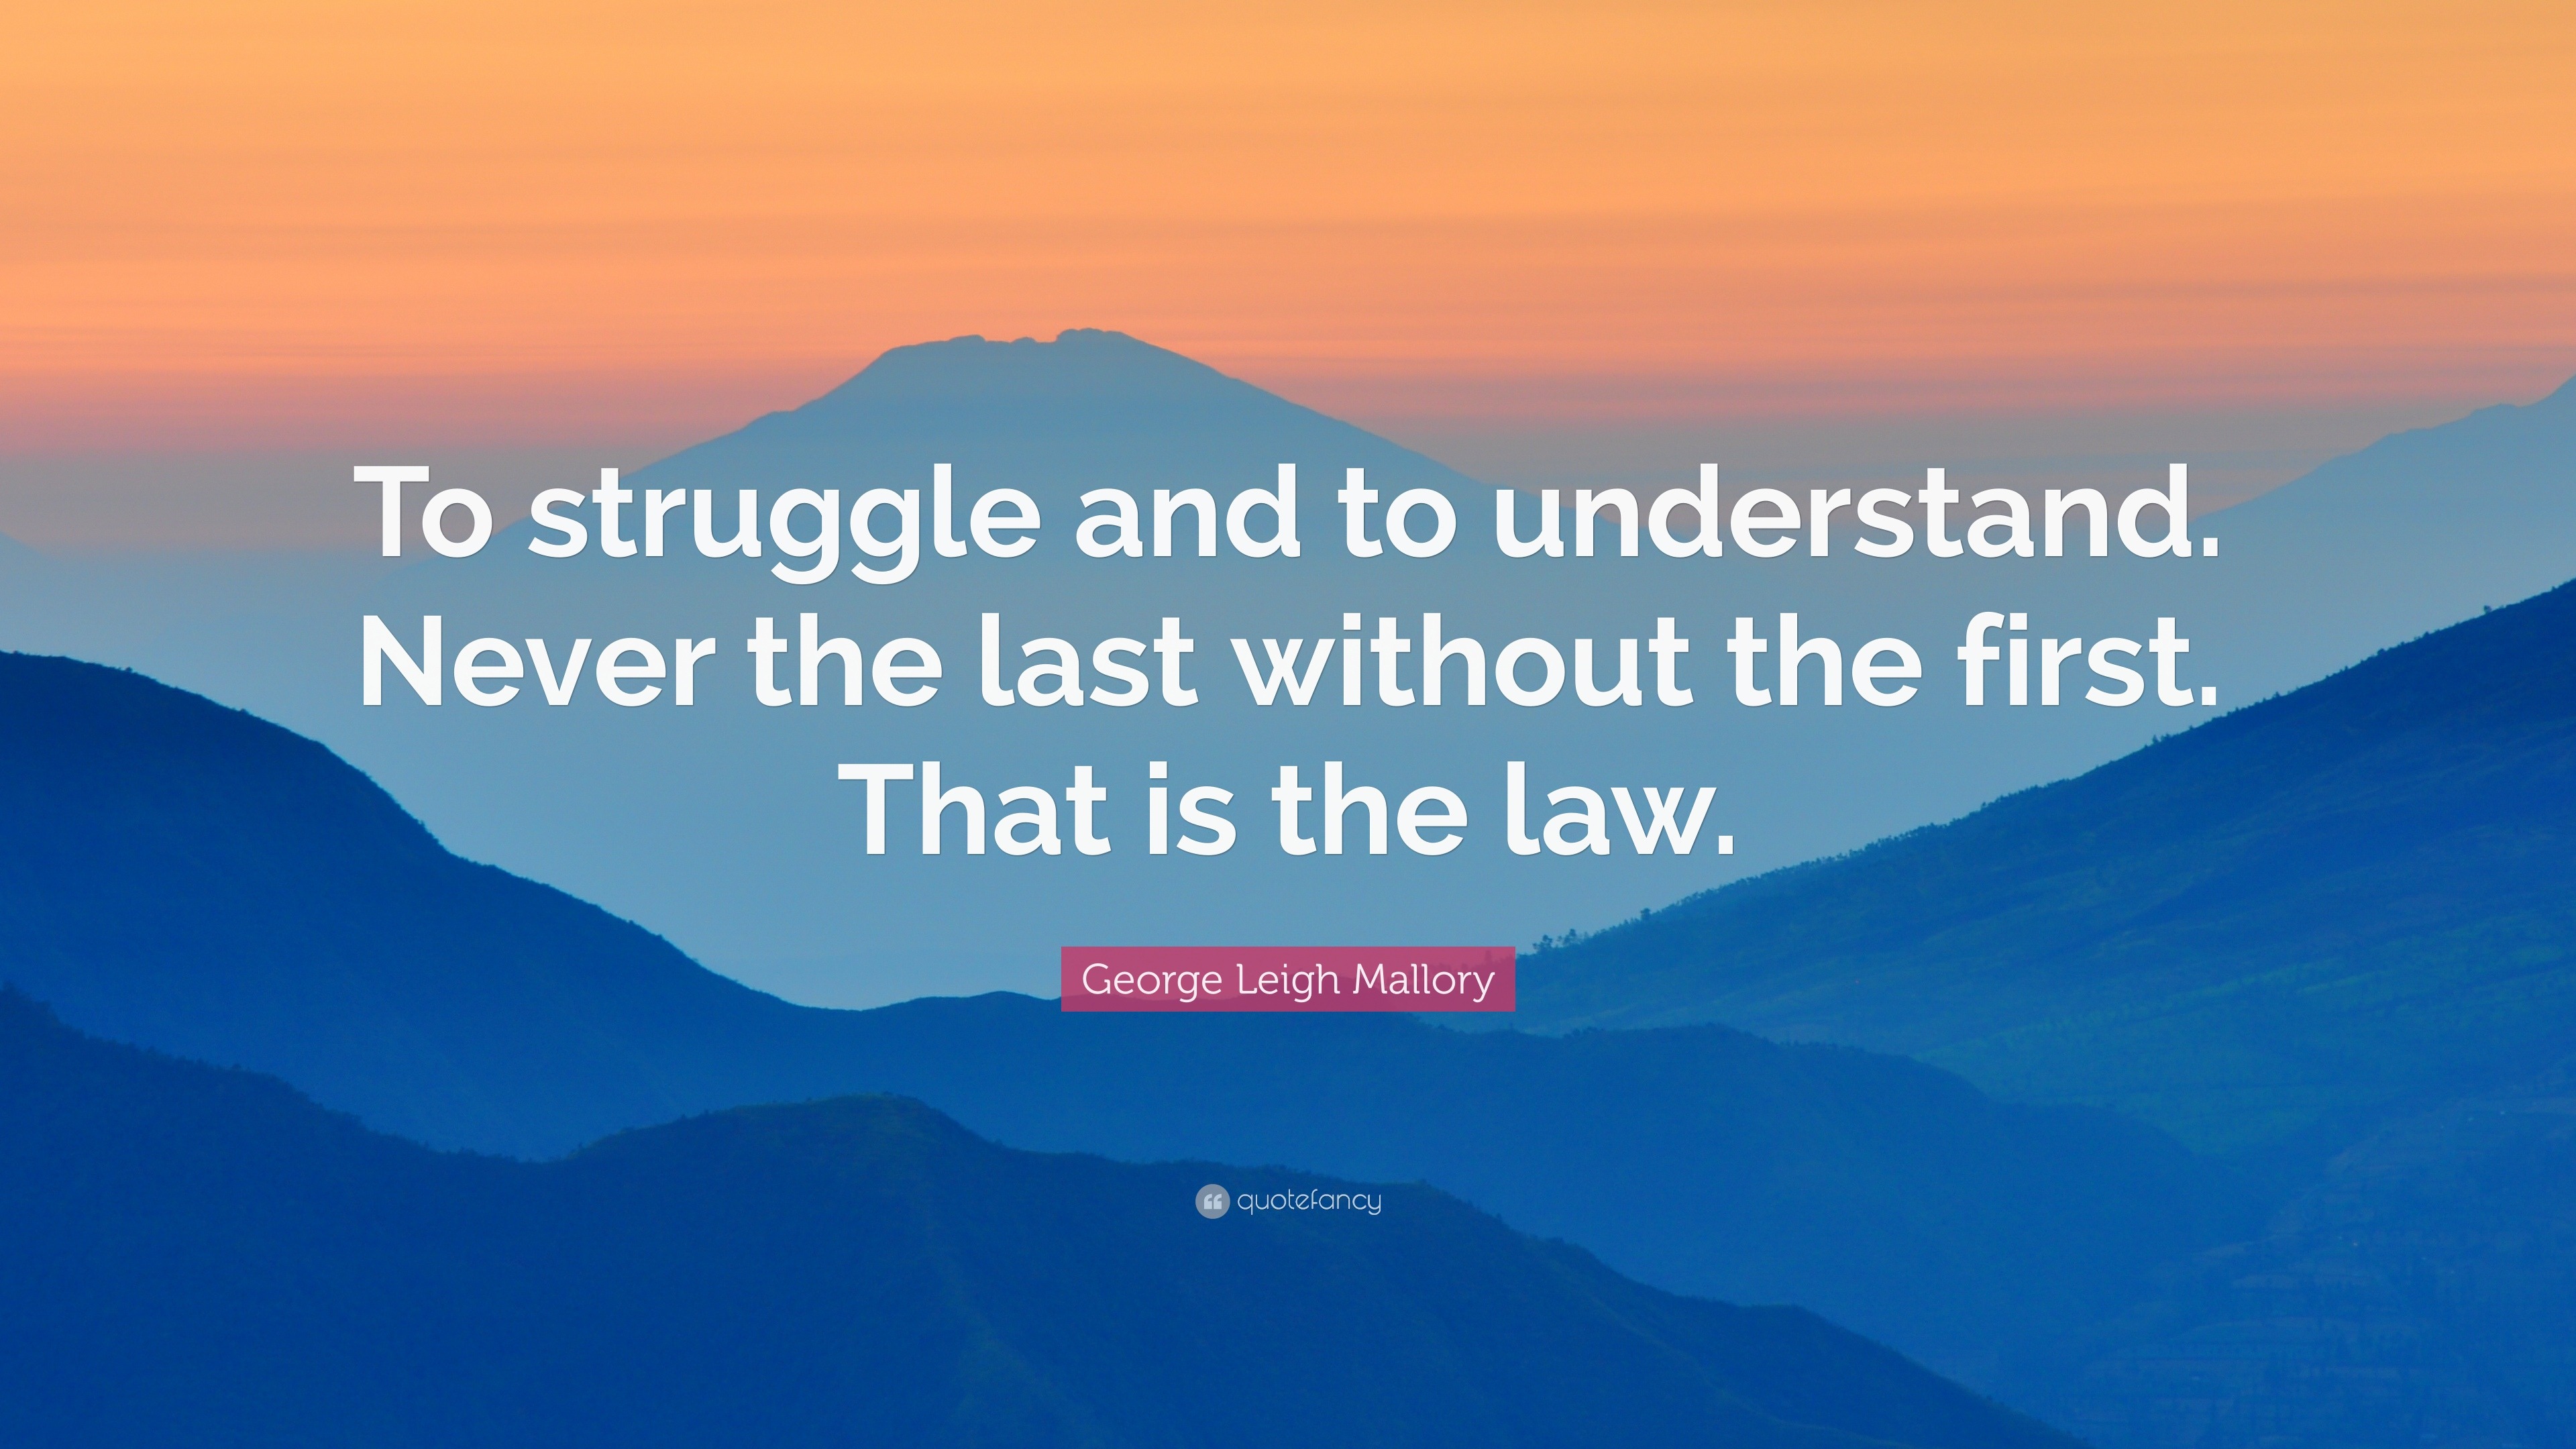 George Leigh Mallory Quote: “To struggle and to understand. Never the